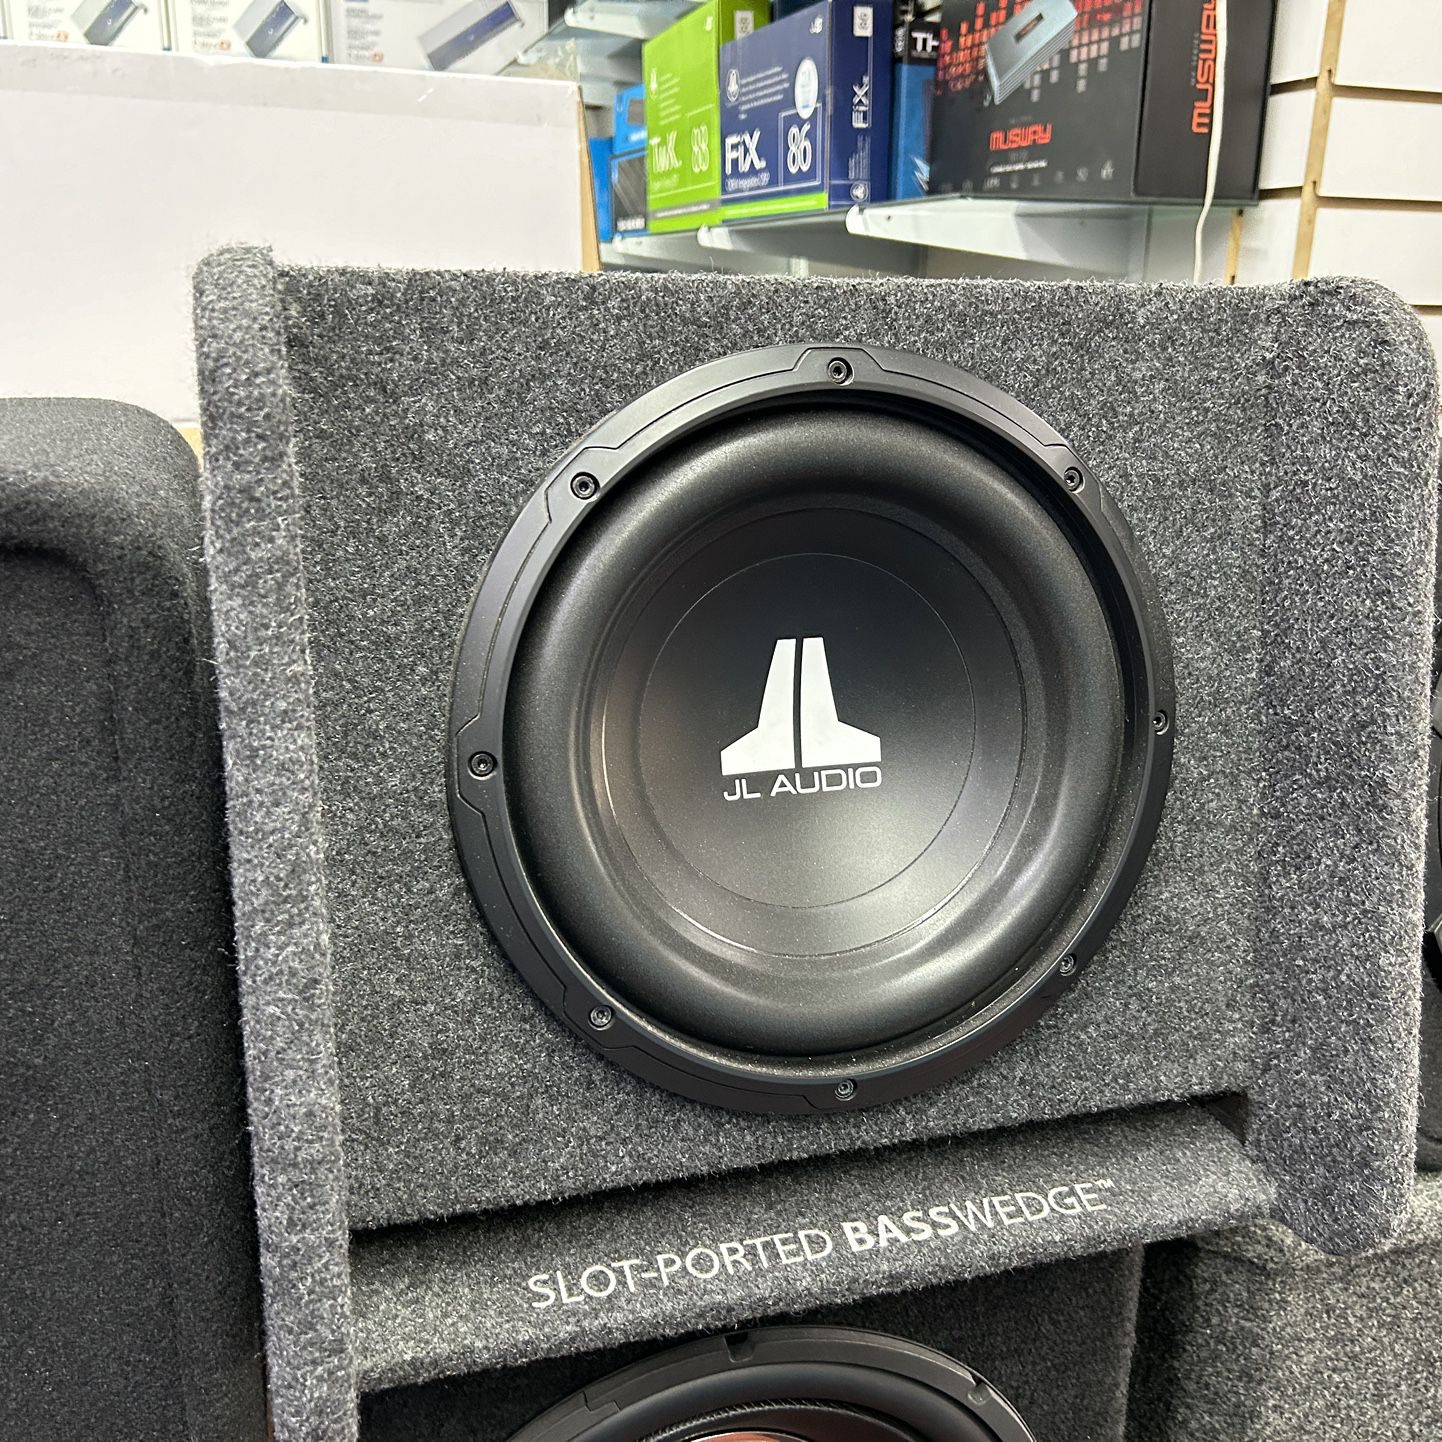 JL AUDIO 10 Inch subwoofer With Custom Ported Box